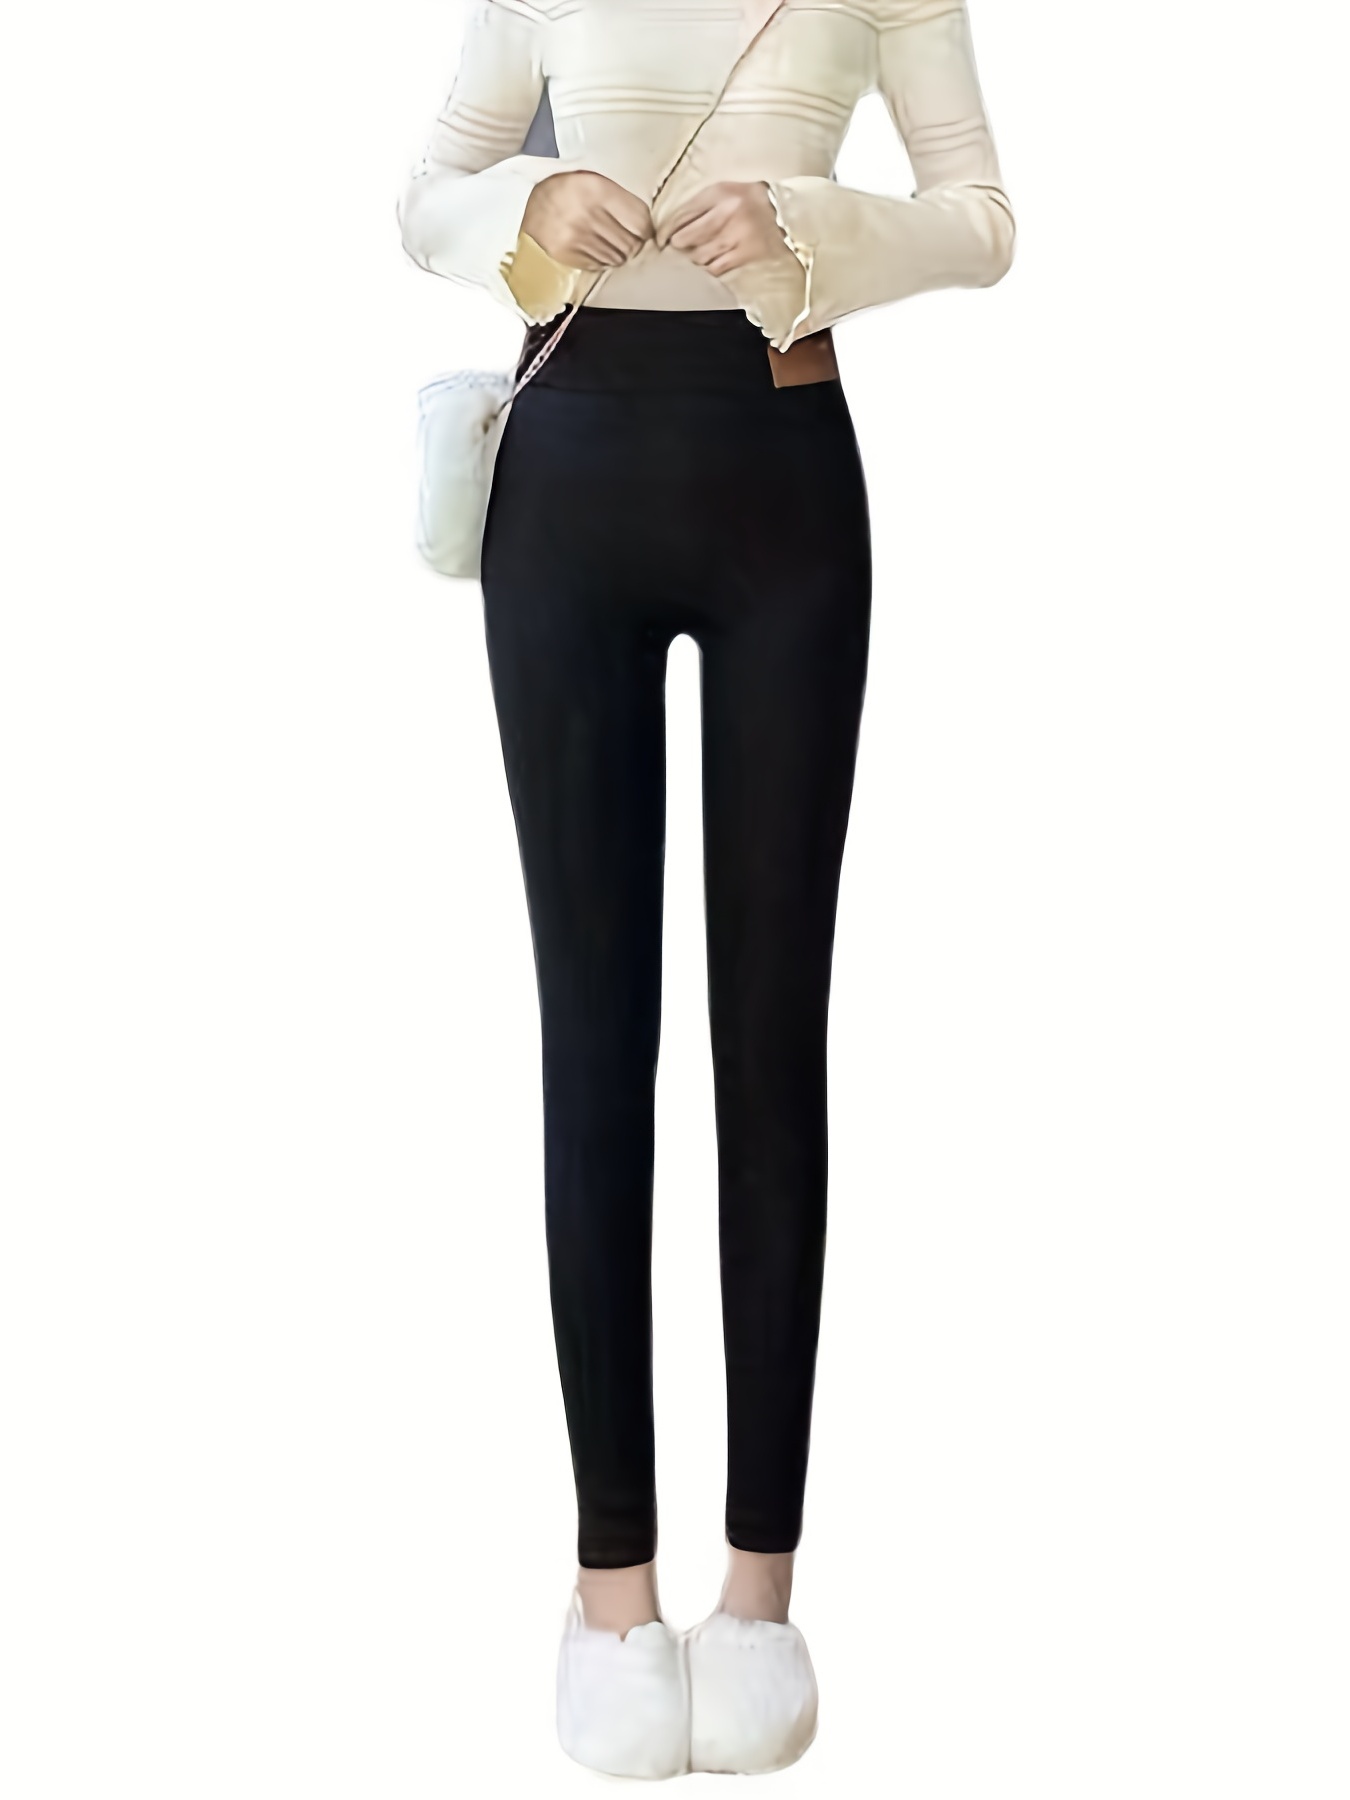 GuyAna Lambskin Winter Leggings, Women's Thermal Fleece Lined Leggings,  2023 Waist Extra Thick Cashmere Thermal Leggings (A-2PCS,S) at   Women's Clothing store